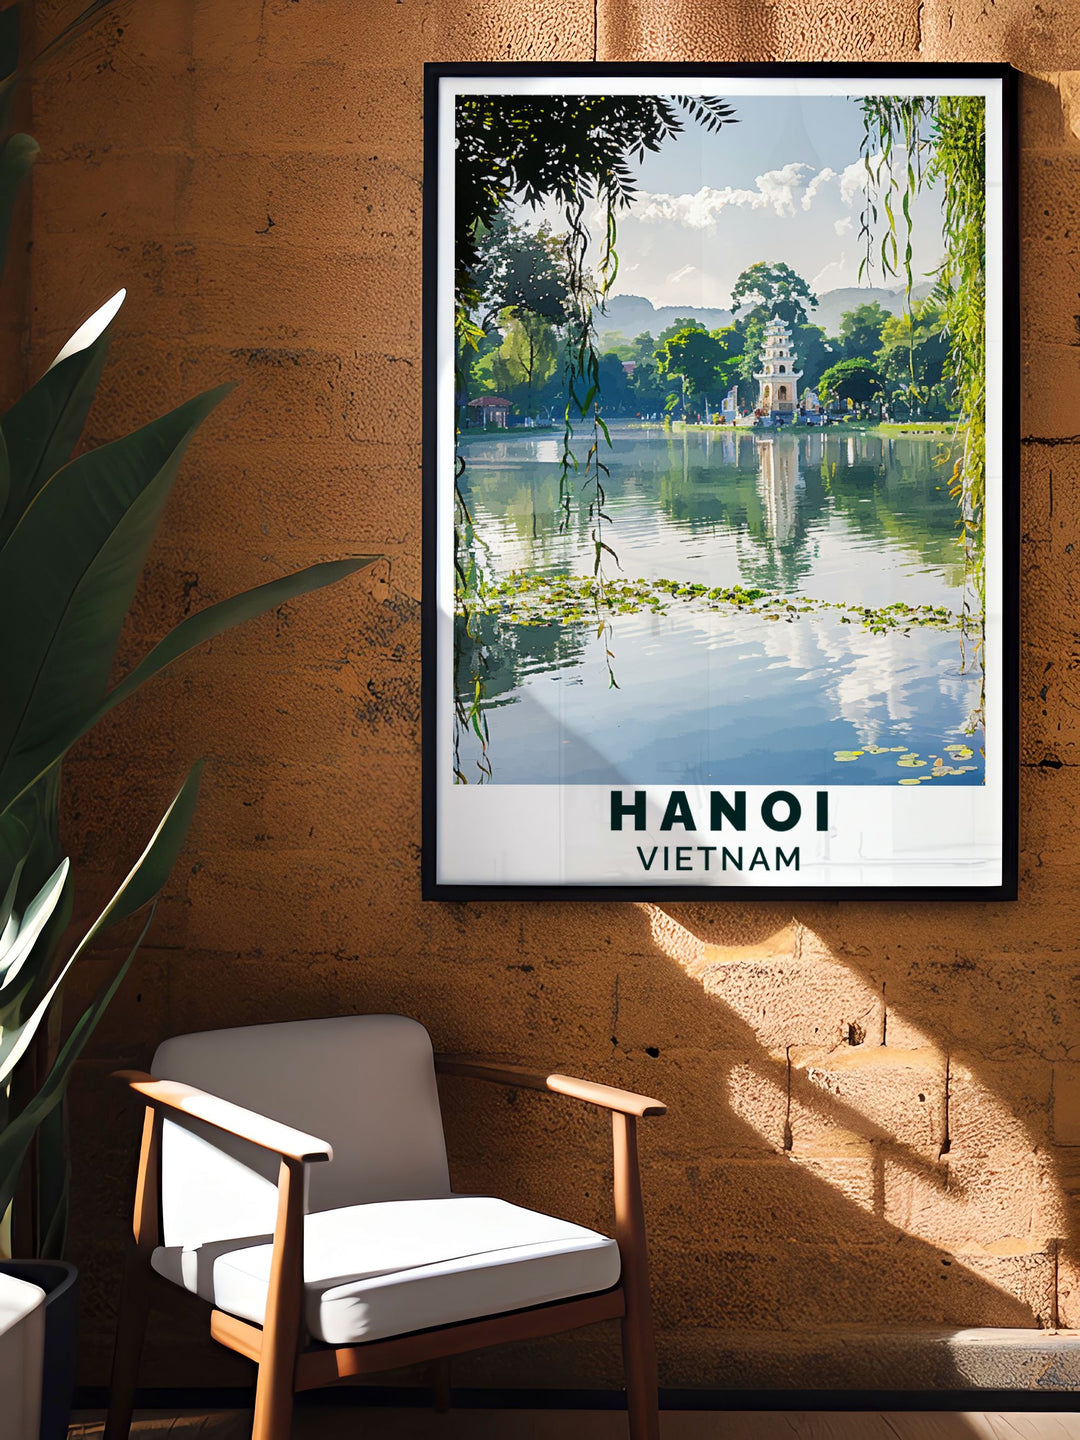 Featuring the vibrant streets and serene waters of Hoan Kiem Lake, this art print captures the cultural heart of Hanoi.